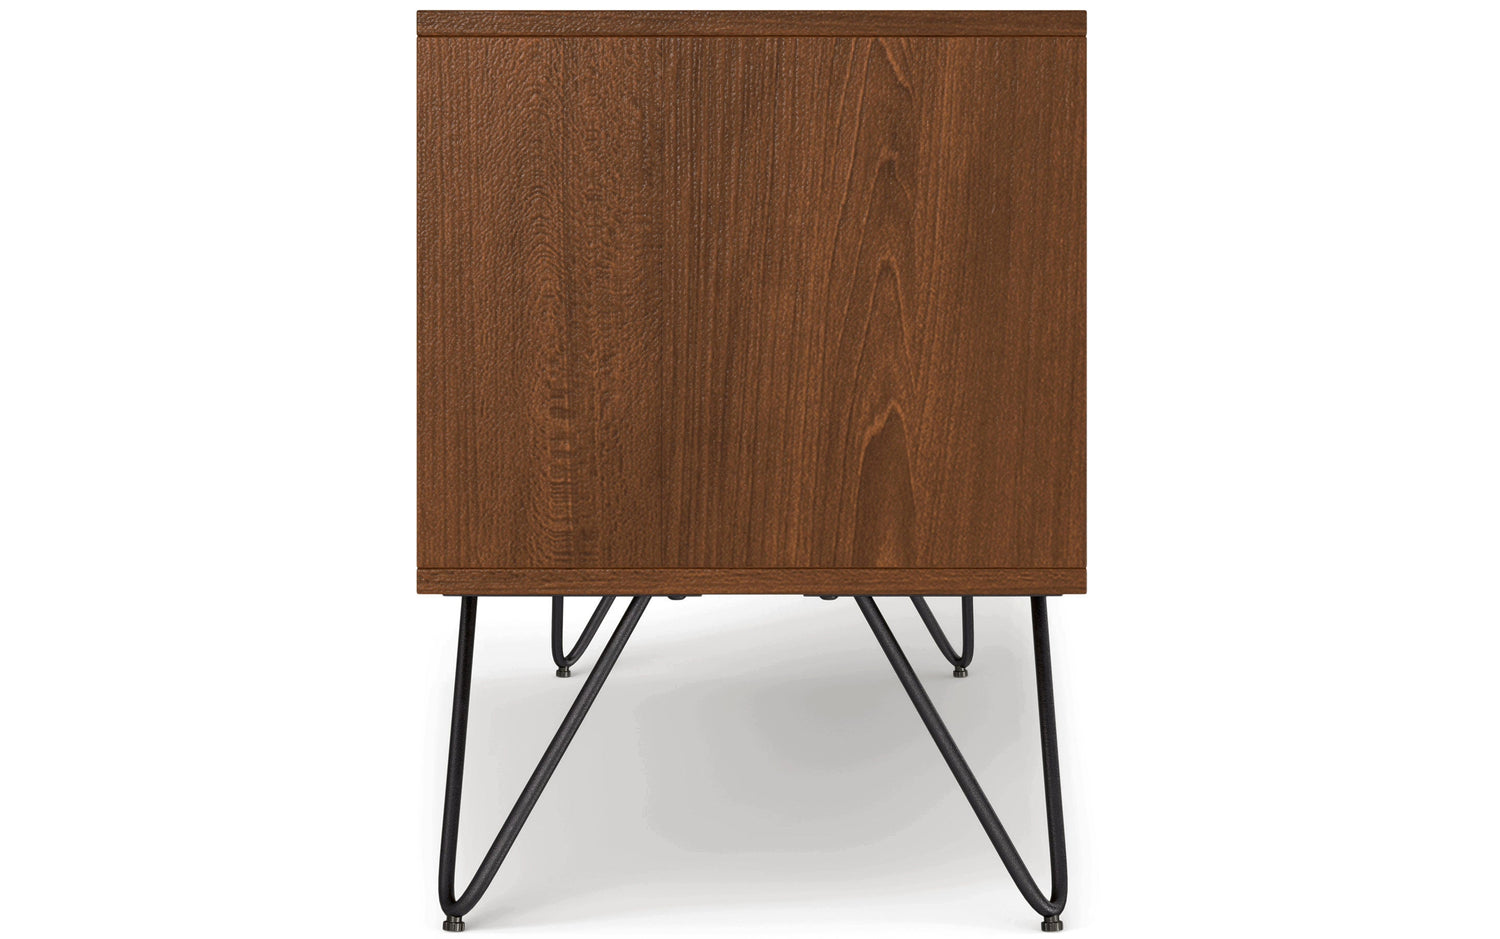 Walnut Walnut Veneer| Hunter 60 x 18 inch TV Media Stand in Natural Mango Wood for TVs up to 66 inches